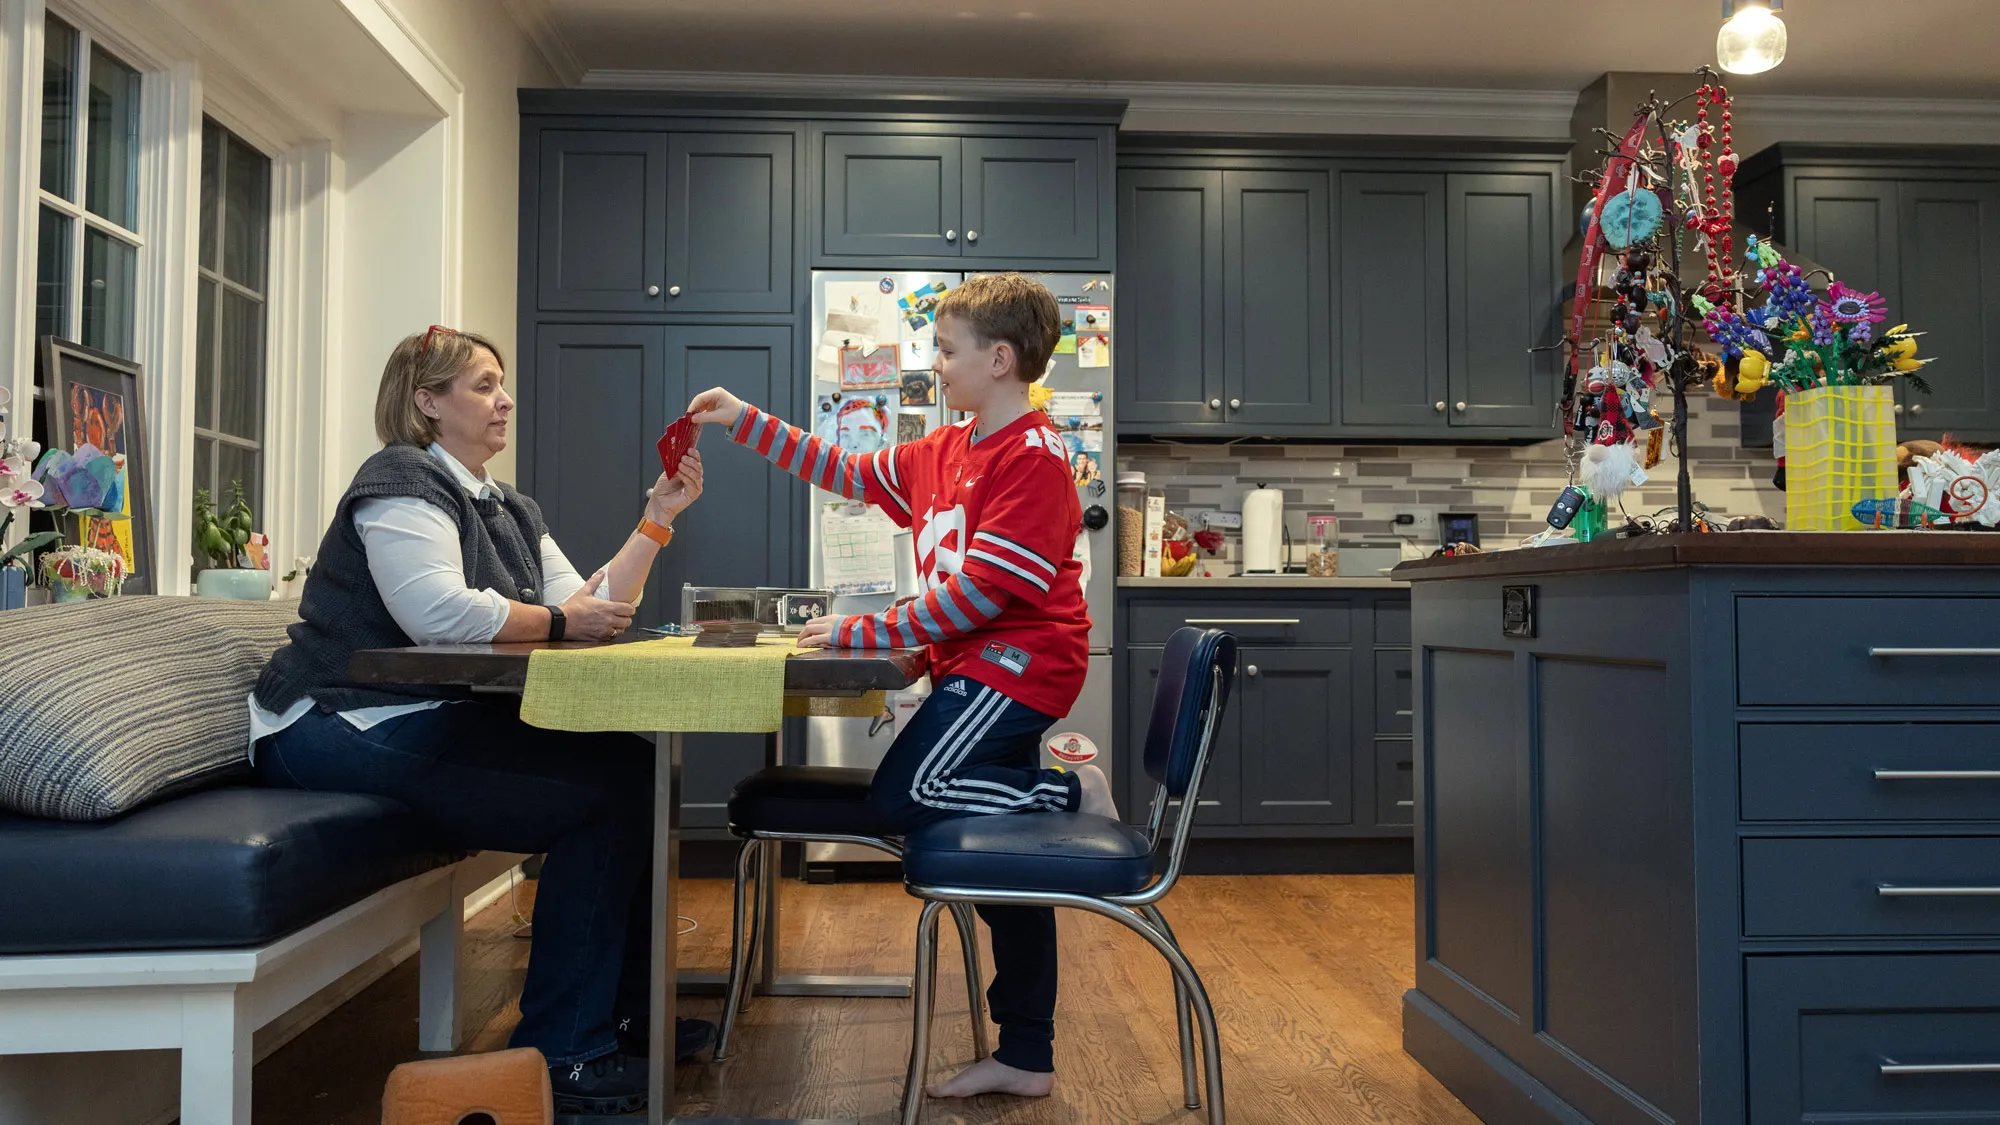 In a beautifully designed kitchen, Betsy sits on a bench at a table holding out a handful of cards to her son, a 9-year-old wearing an Ohio State jersey and sweatpants. They have the same color hair, and seem relaxed, as if this is something they’ve done hundreds of times before.